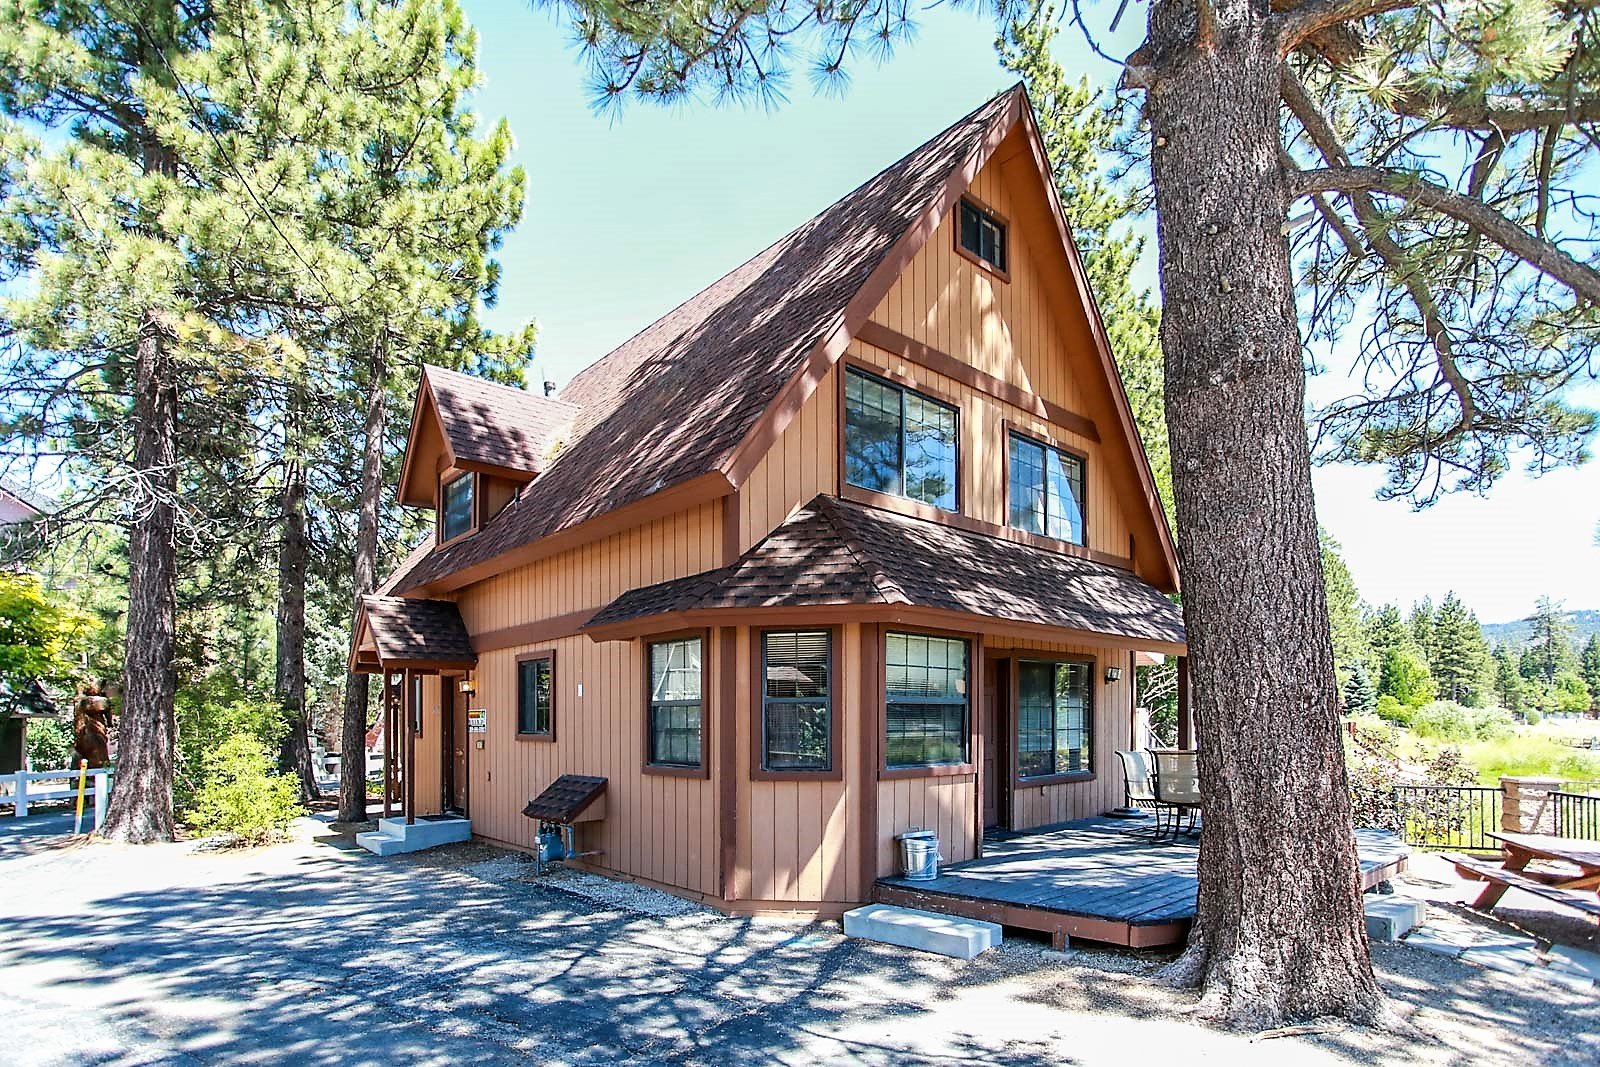 4 Bedroom Big Bear Mountain Cabins for Rent